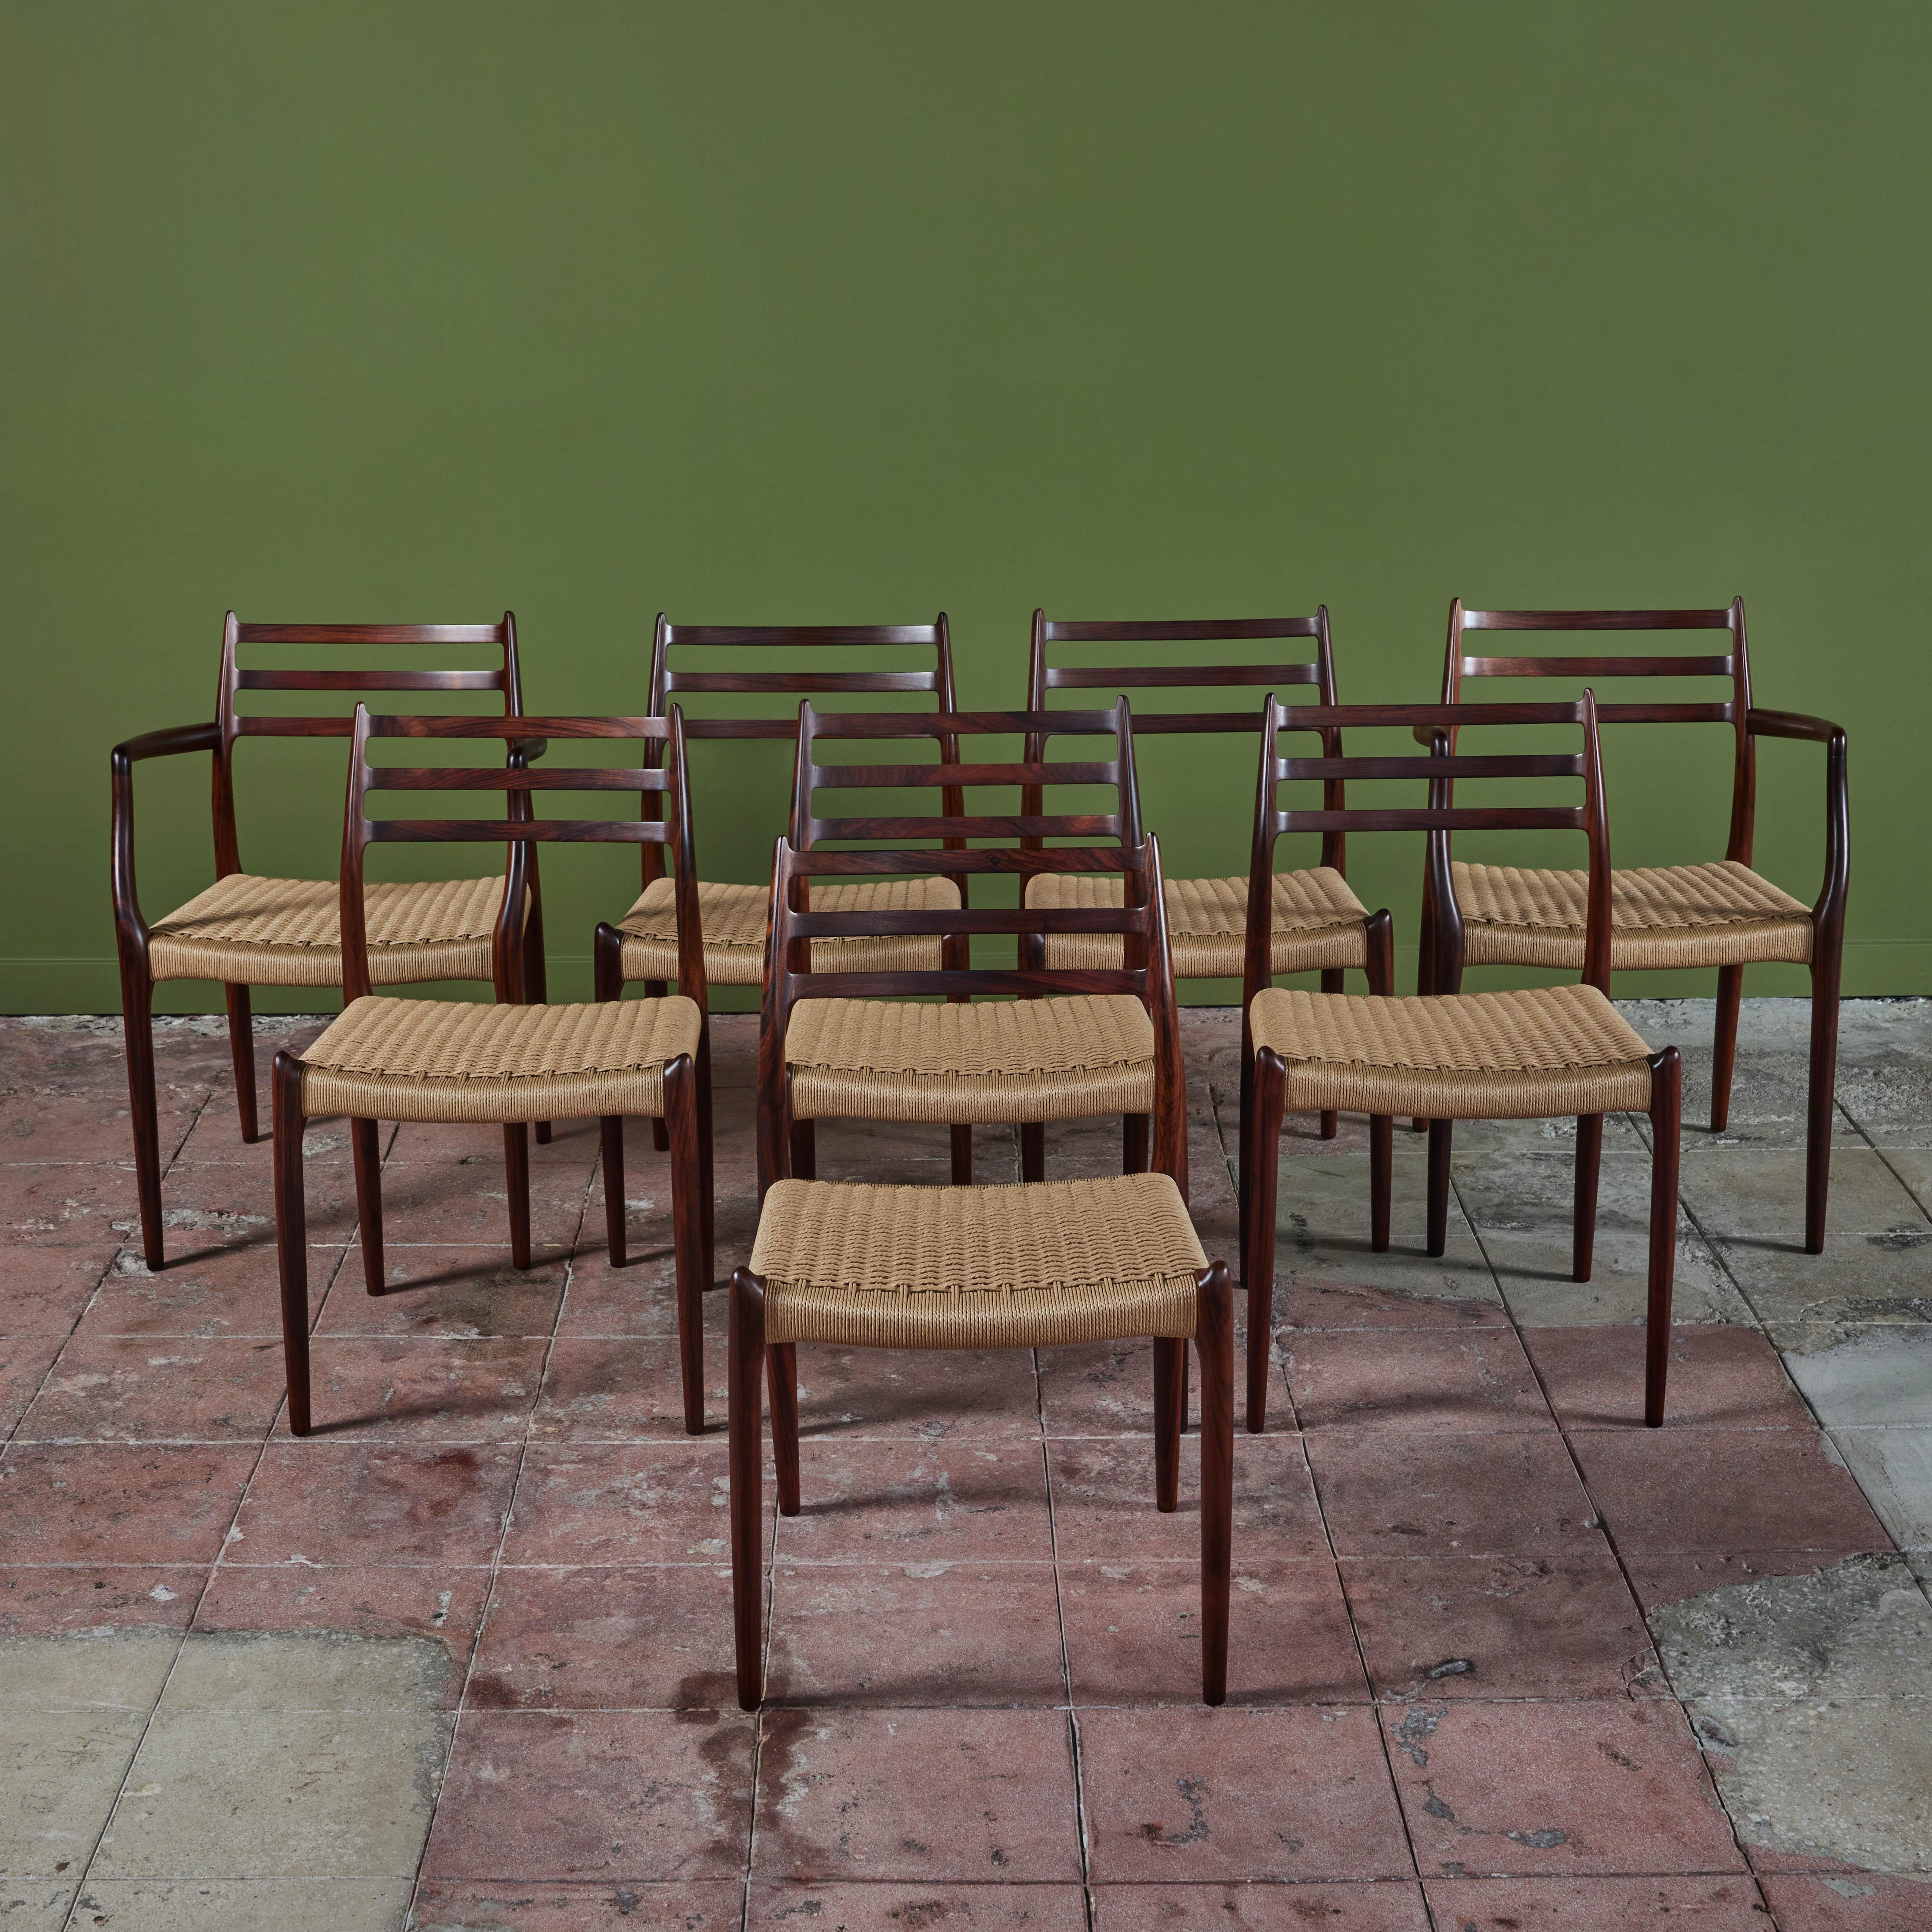 A set of eight rosewood dining chairs designed by Niels Otto Møller in 1962 and manufactured by JL Møllers Møbelfabrik of Denmark with Danish [paper] cord seats. The chairs have a curved backrest with three horizontal supports, terminating in a